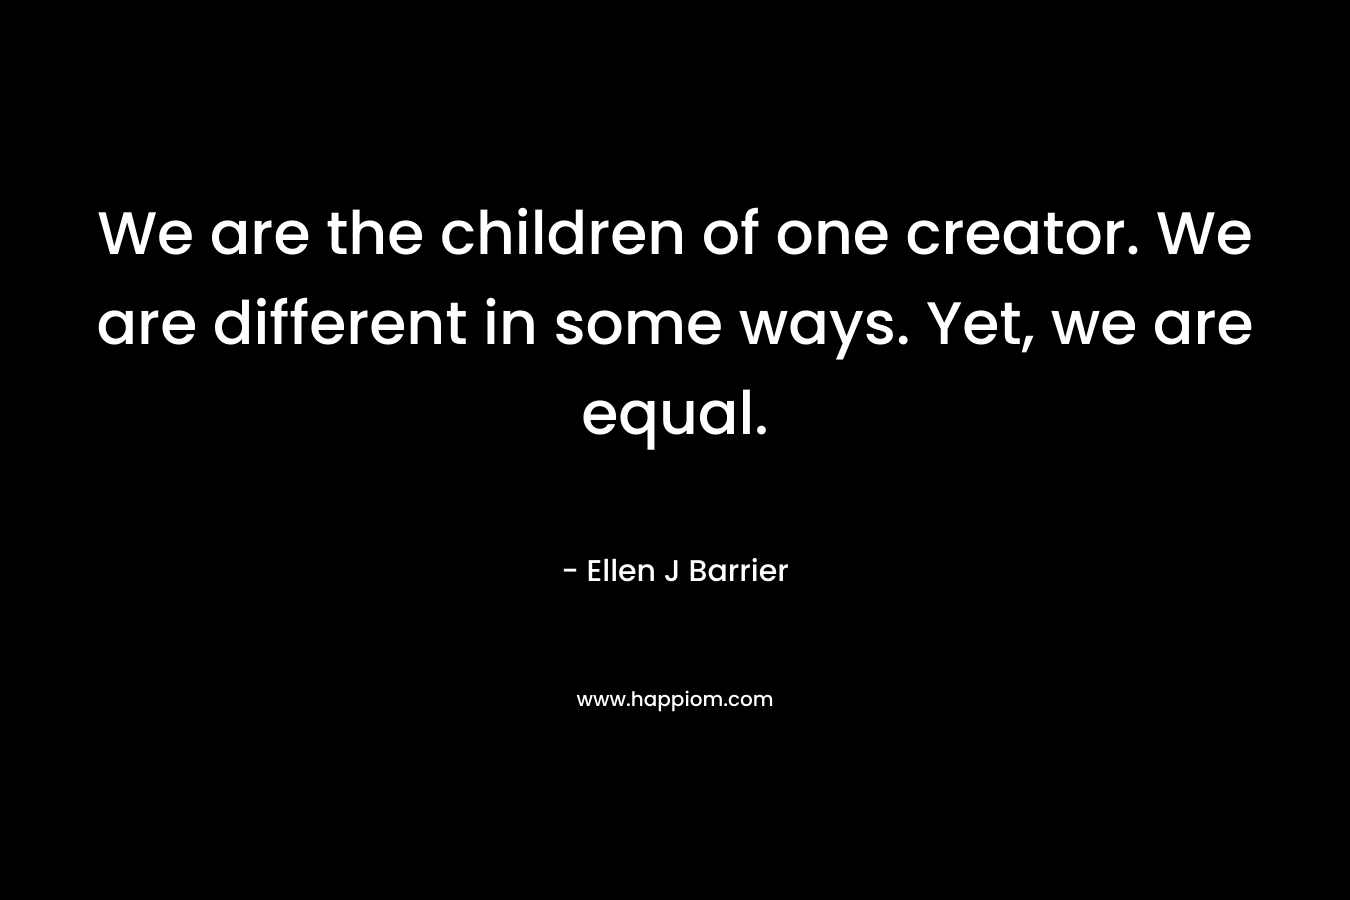 We are the children of one creator. We are different in some ways. Yet, we are equal. – Ellen J Barrier